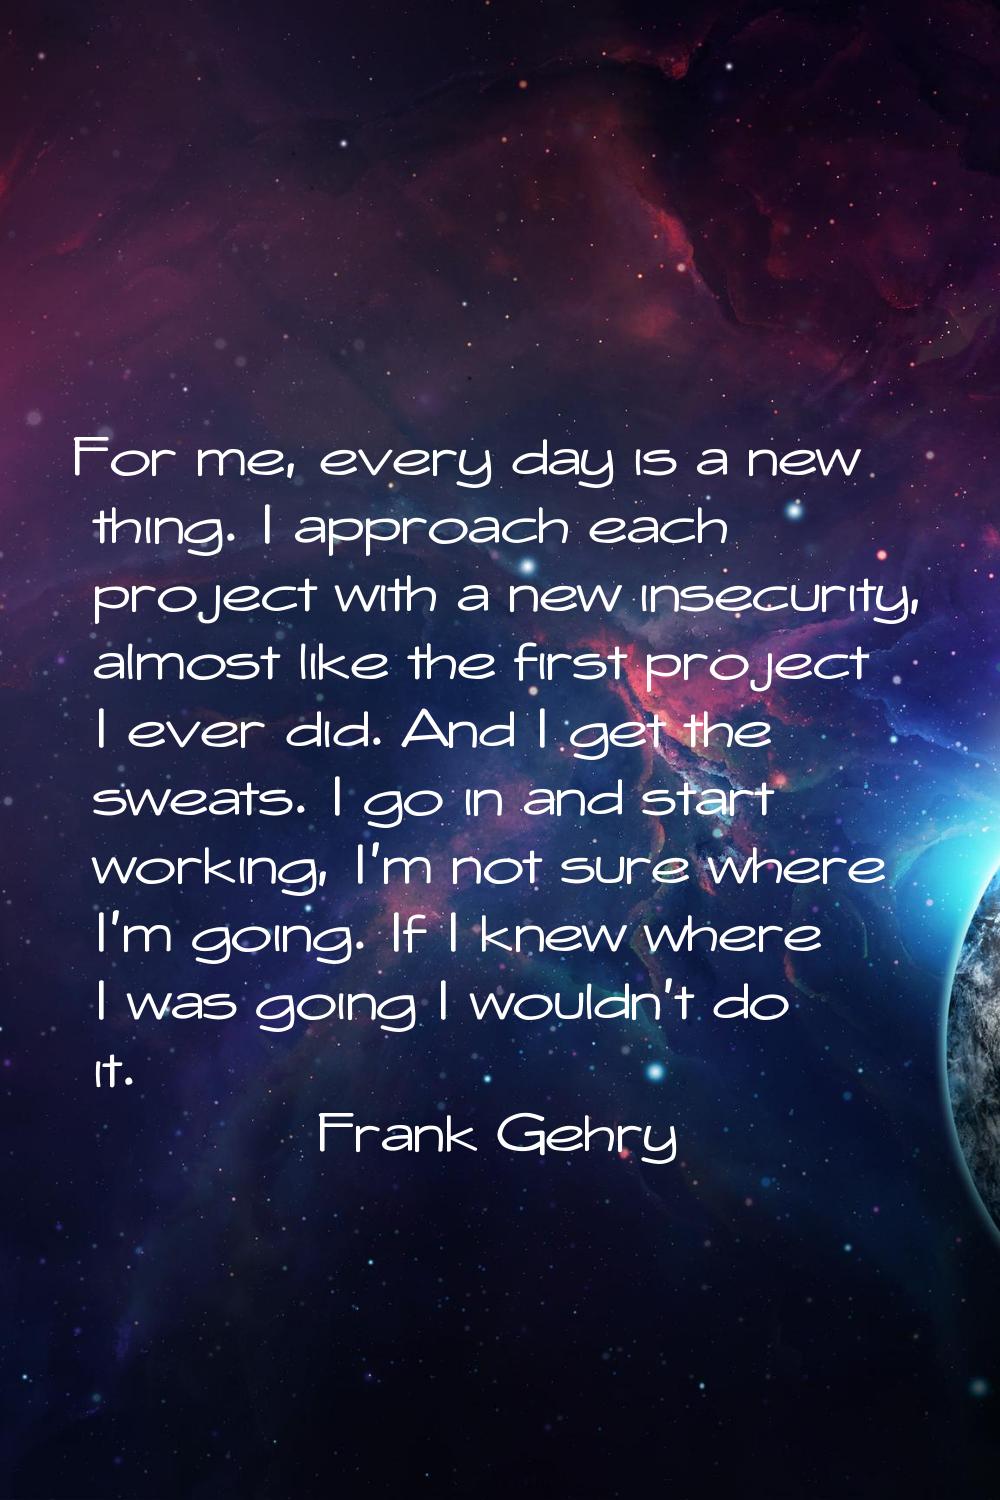 For me, every day is a new thing. I approach each project with a new insecurity, almost like the fi